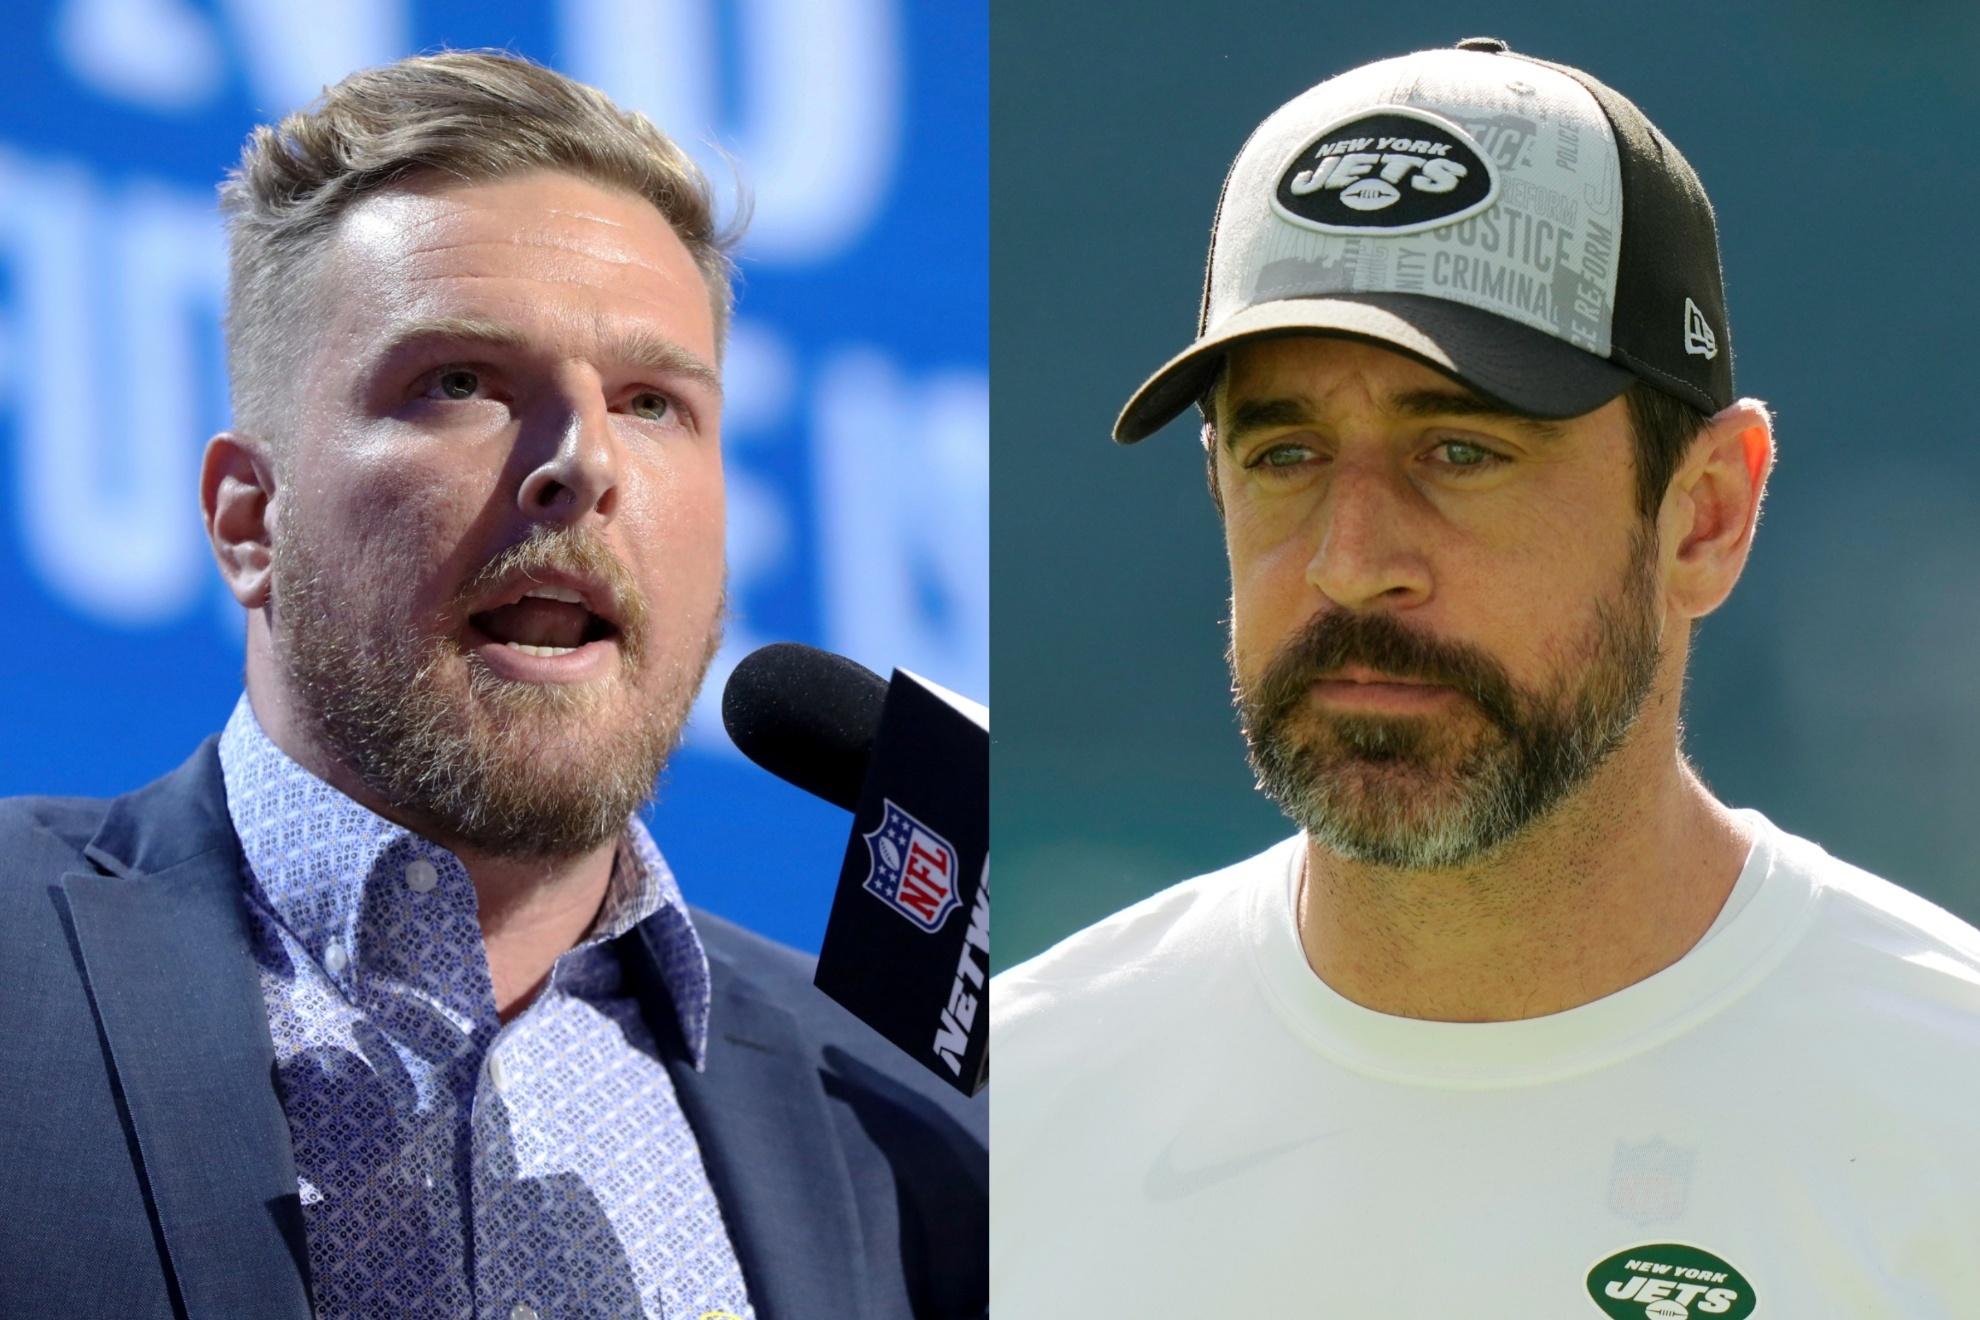 Podcast host Pat McAfee and New York Jets quarterback Aaron Rodgers.